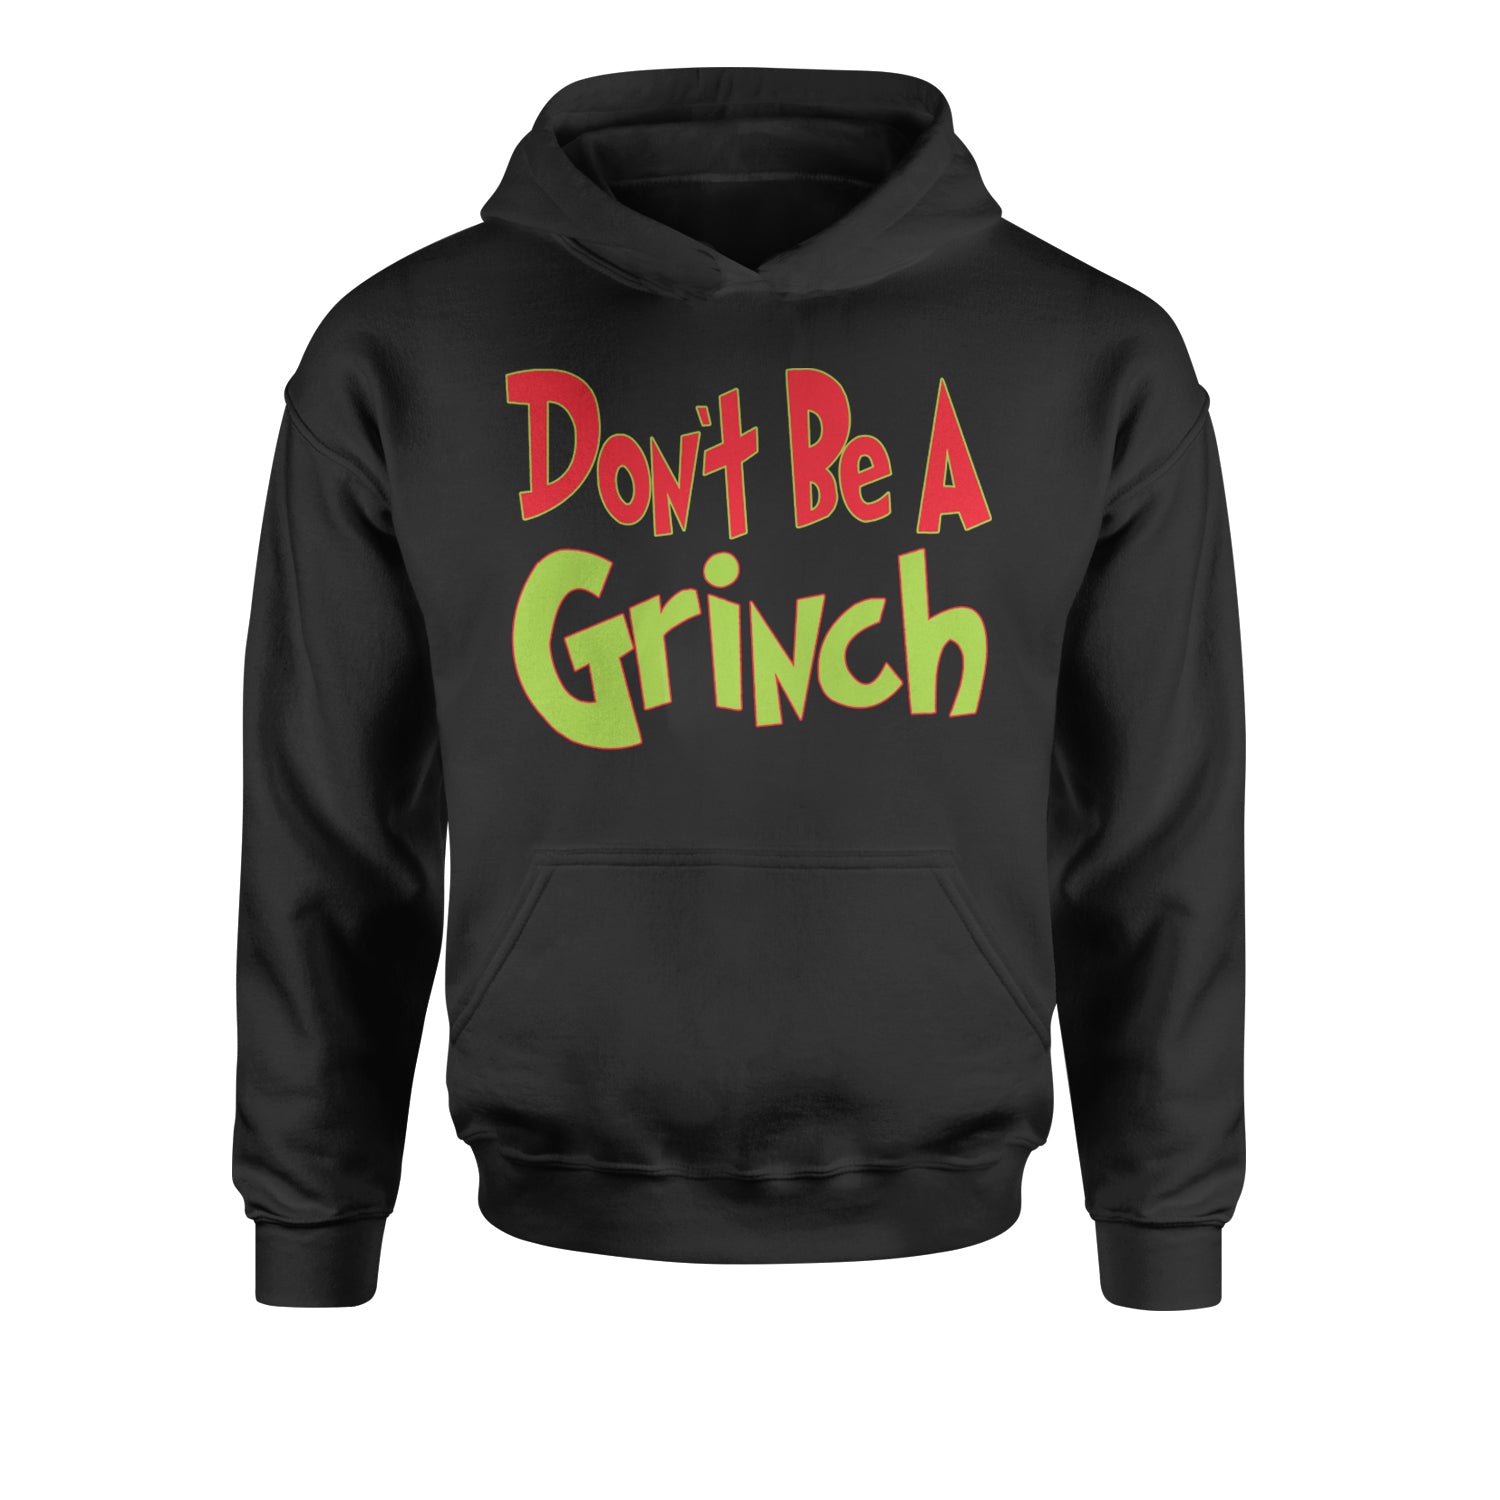 Don't Be A Gr-nch Jolly Grinchmas Merry Christmas Youth-Sized Hoodie